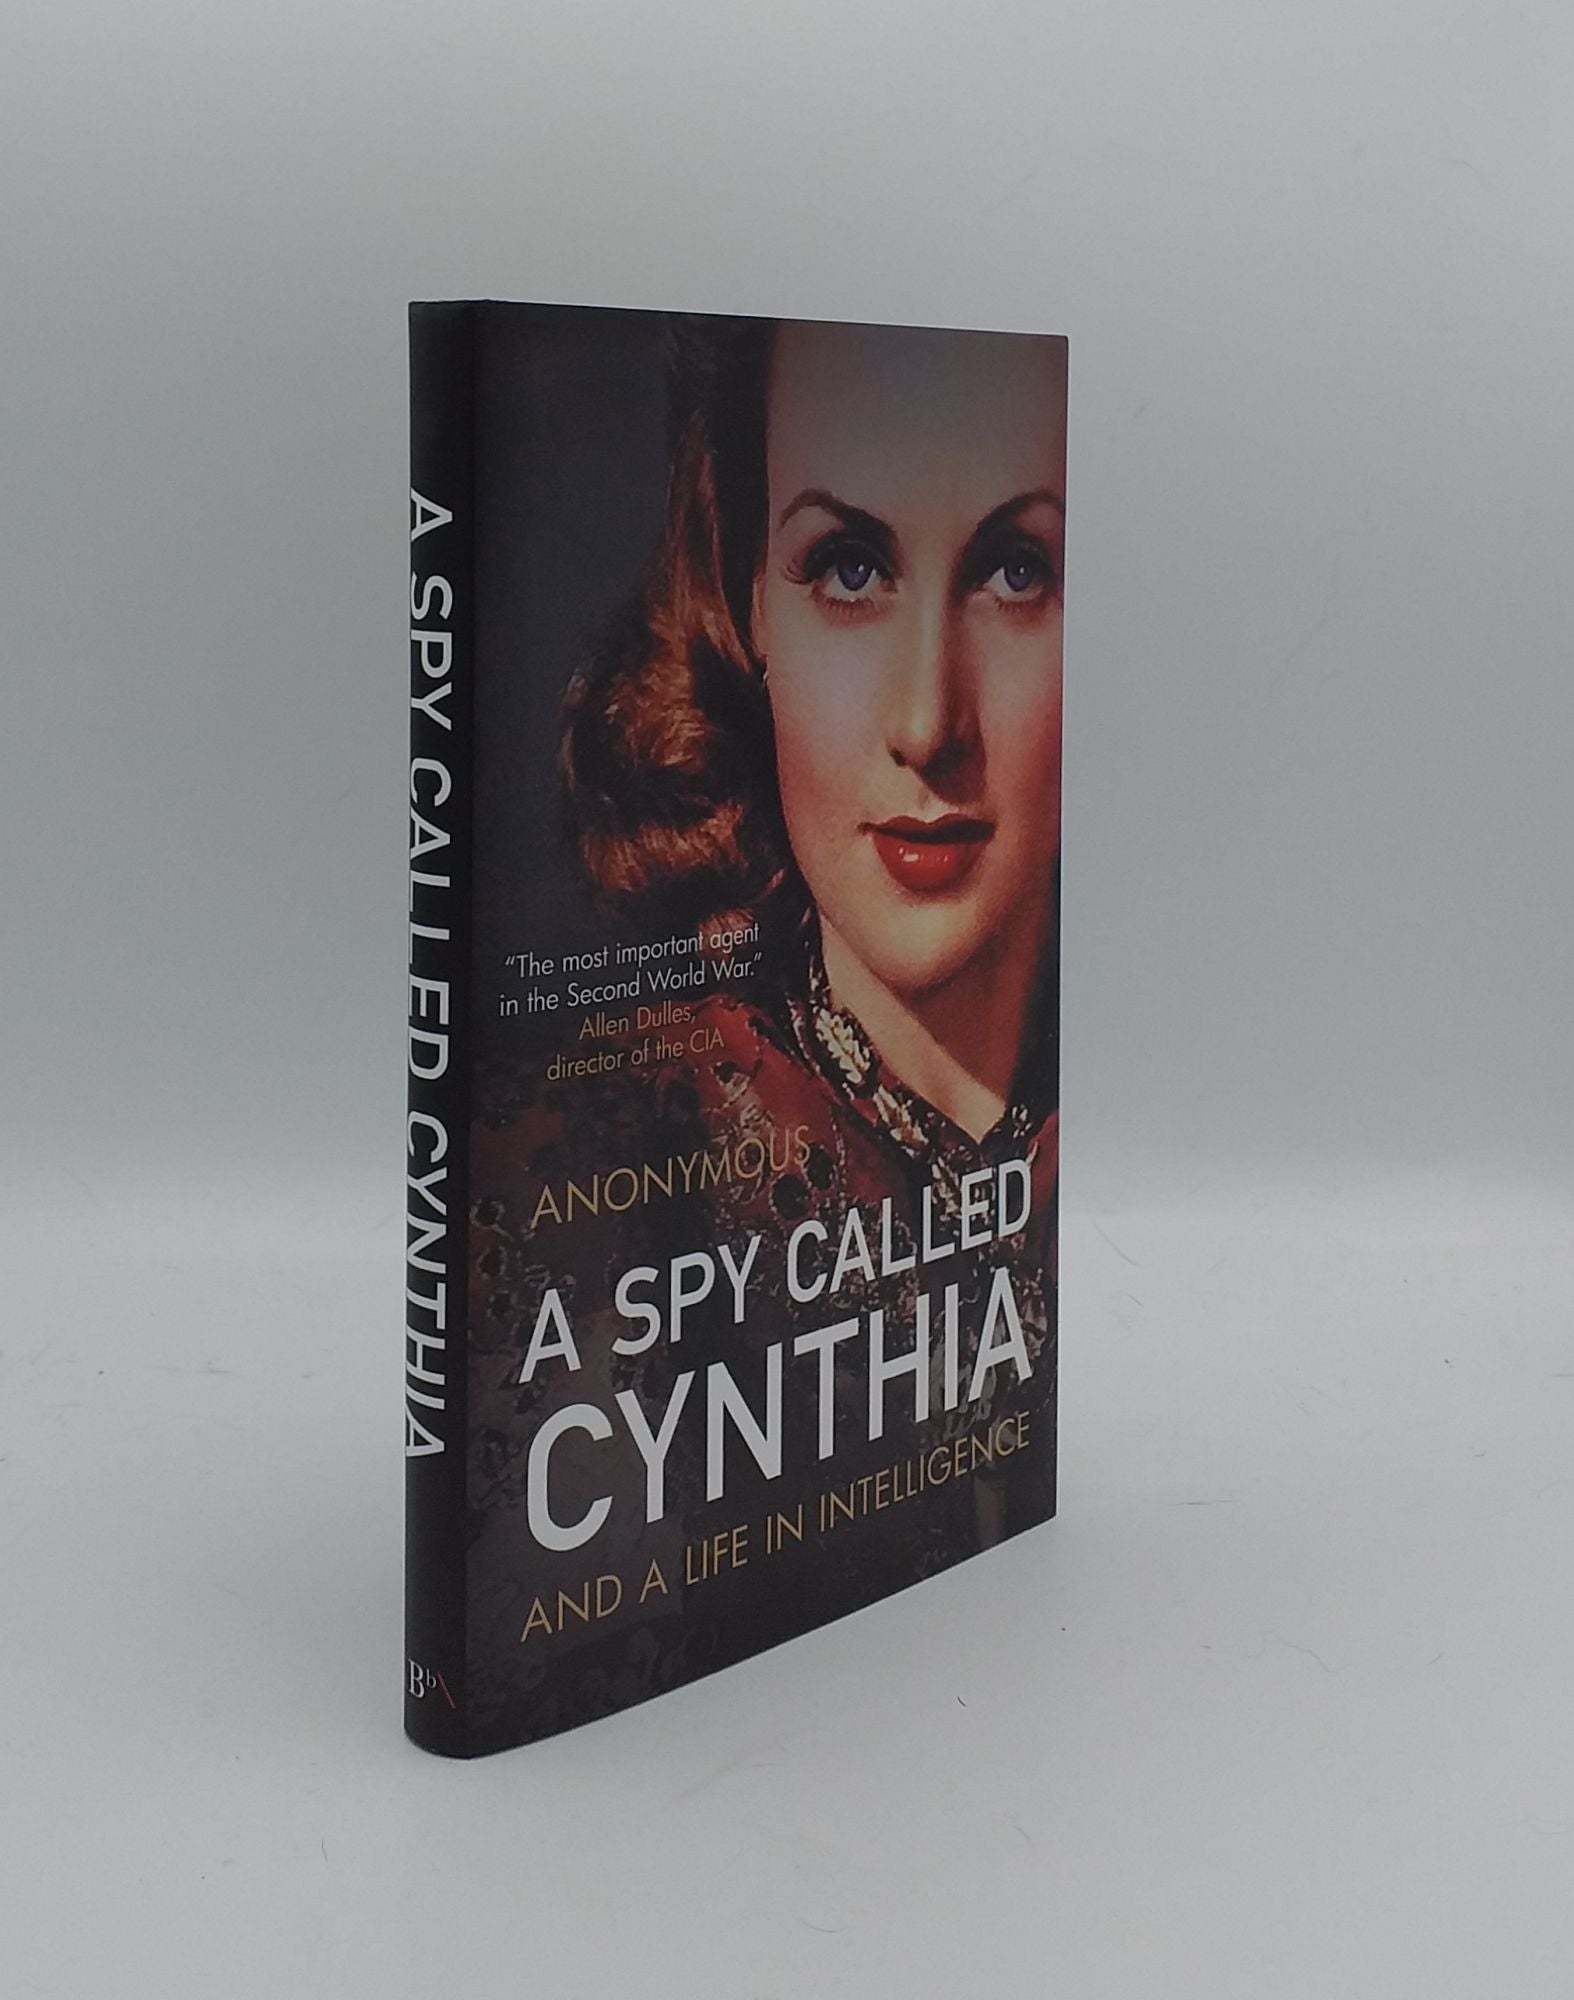 Anonymous - A Spy Called Cynthia and a Life in Intelligence